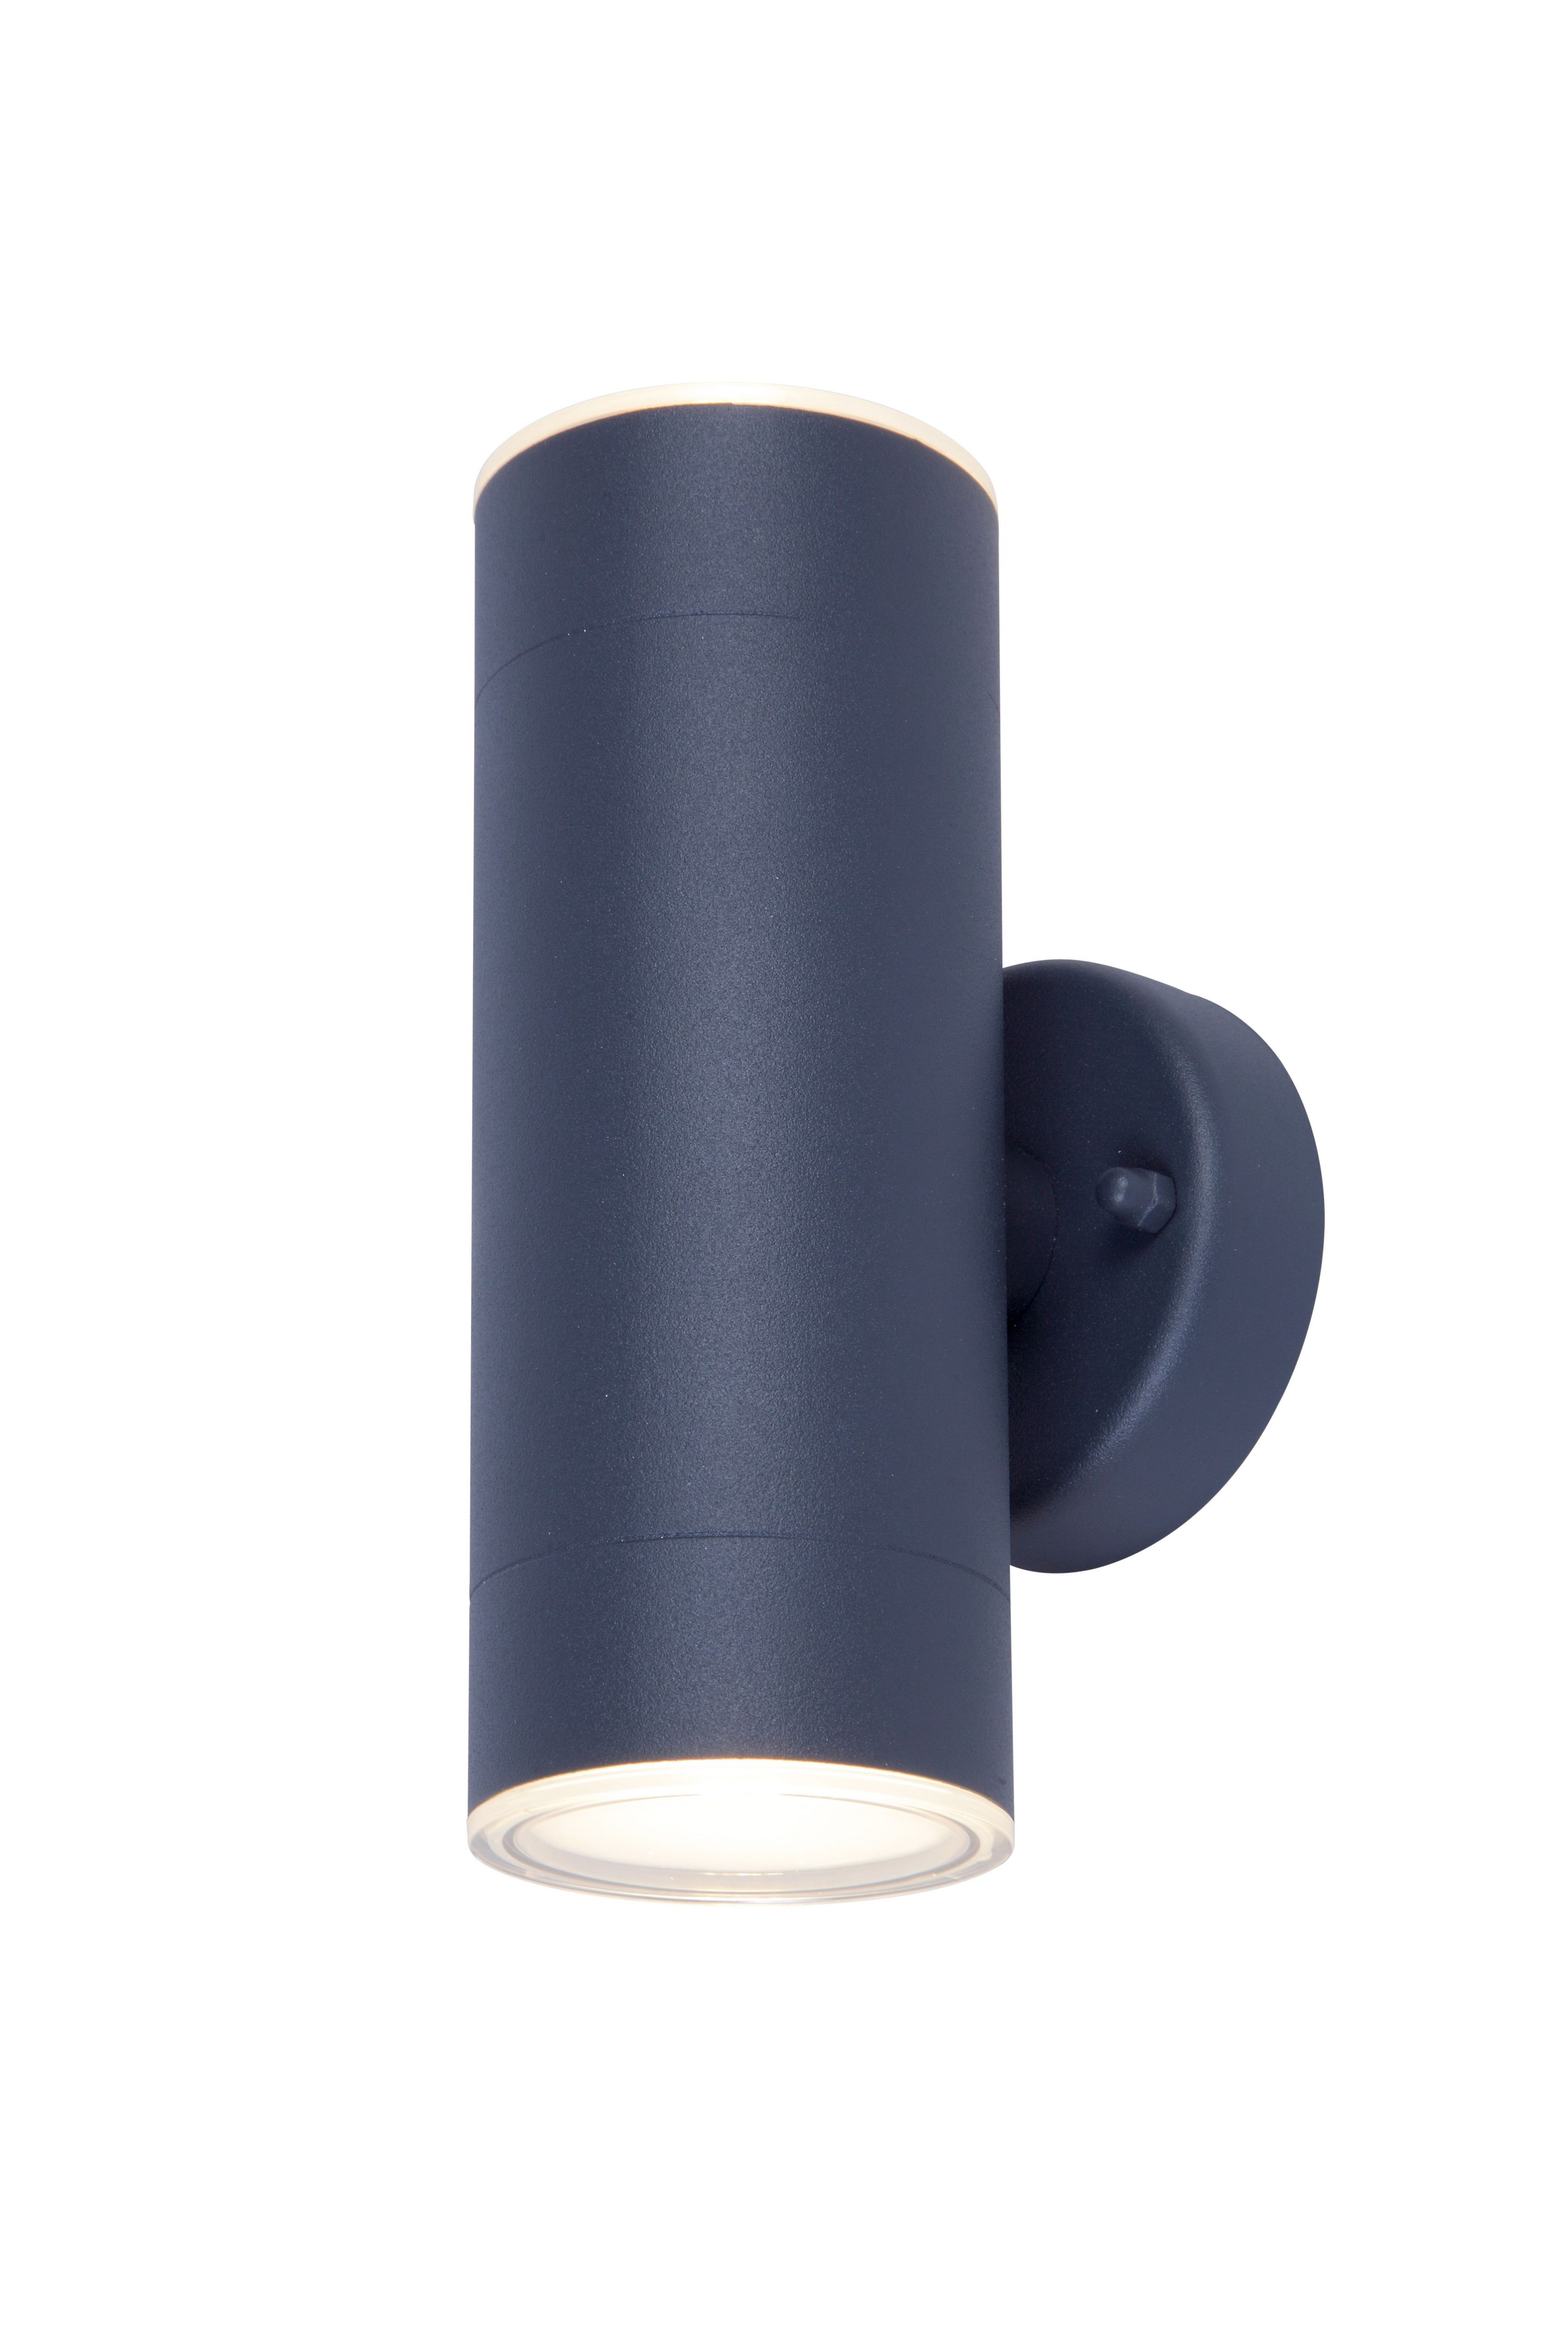 GoodHome Fixed Matt Dark grey Mains-powered Integrated LED Outdoor Double Wall light 760lm (Dia)6cm